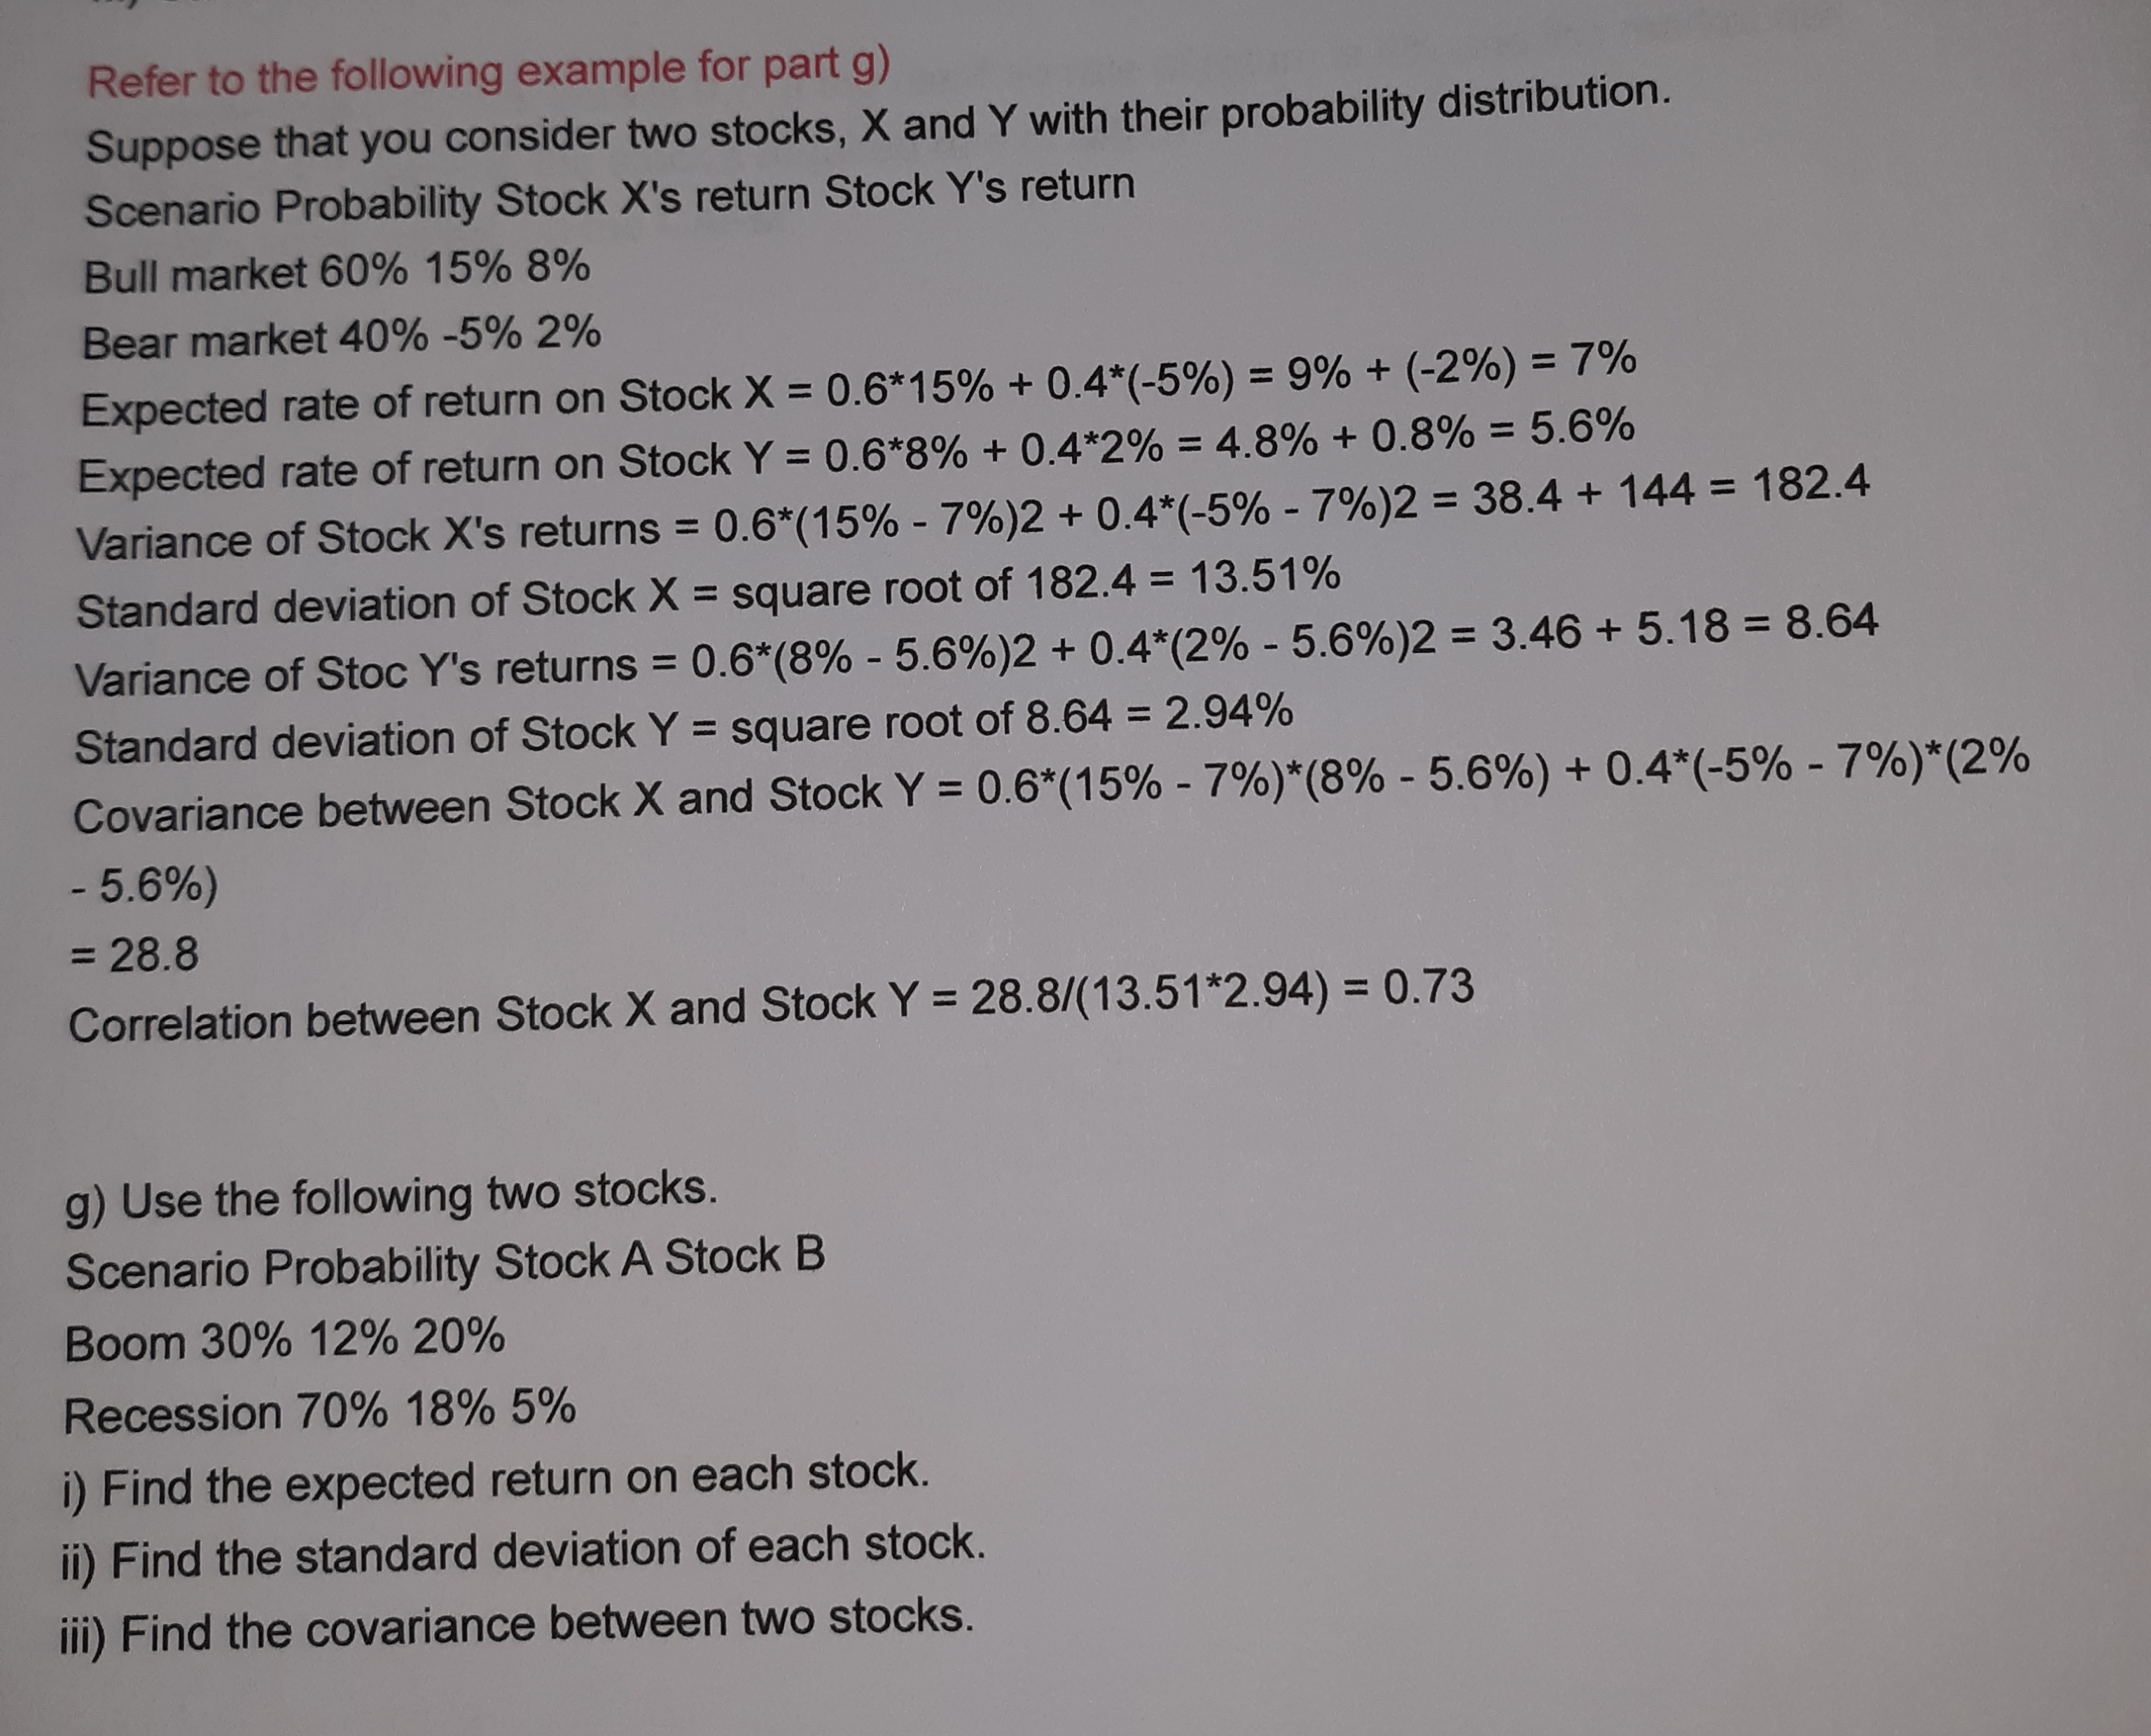 Refer to the following example for part g)
Suppose that you consider two stocks, X and Y with their probability distribution.
Scenario Probability Stock X's return Stock Y's return
Bull market 60% 15% 8%
Bear market 40% -5% 2%
Expected rate of return on Stock X = 0.6*15% + 0.4*(-5%) = 9% + (-2%) = 7%
Expected rate of return on Stock Y = 0.6*8% + 0.4*2% = 4.8% + 0.8% = 5.6%
%3D
%3D
%3D
Variance of Stock X's returns = 0.6*(15% - 7%)2 + 0.4*(-5% - 7%)2 = 38.4 + 144 = 182.4
Standard deviation of Stock X = square root of 182.4 = 13.51%
%3D
%3D
Variance of Stoc Y's returns = 0.6*(8% - 5.6%)2 + 0.4*(2% - 5.6%)2 = 3.46 + 5.18 = 8.64
Standard deviation of Stock Y = square root of 8.64 = 2.94%
%3D
Covariance between Stock X and Stock Y = 0.6*(15% - 7%)*(8% - 5.6%) + 0.4*(-5% - 7%)*(2%
- 5.6%)
= 28.8
Correlation between Stock X and Stock Y = 28.8/(13.51*2.94) = 0.73
g) Use the following two stocks.
Scenario Probability Stock A Stock B
Boom 30% 12% 20%
Recession 70% 18% 5%
i) Find the expected return on each stock.
ii) Find the standard deviation of each stock.
iii) Find the covariance between two stocks.
